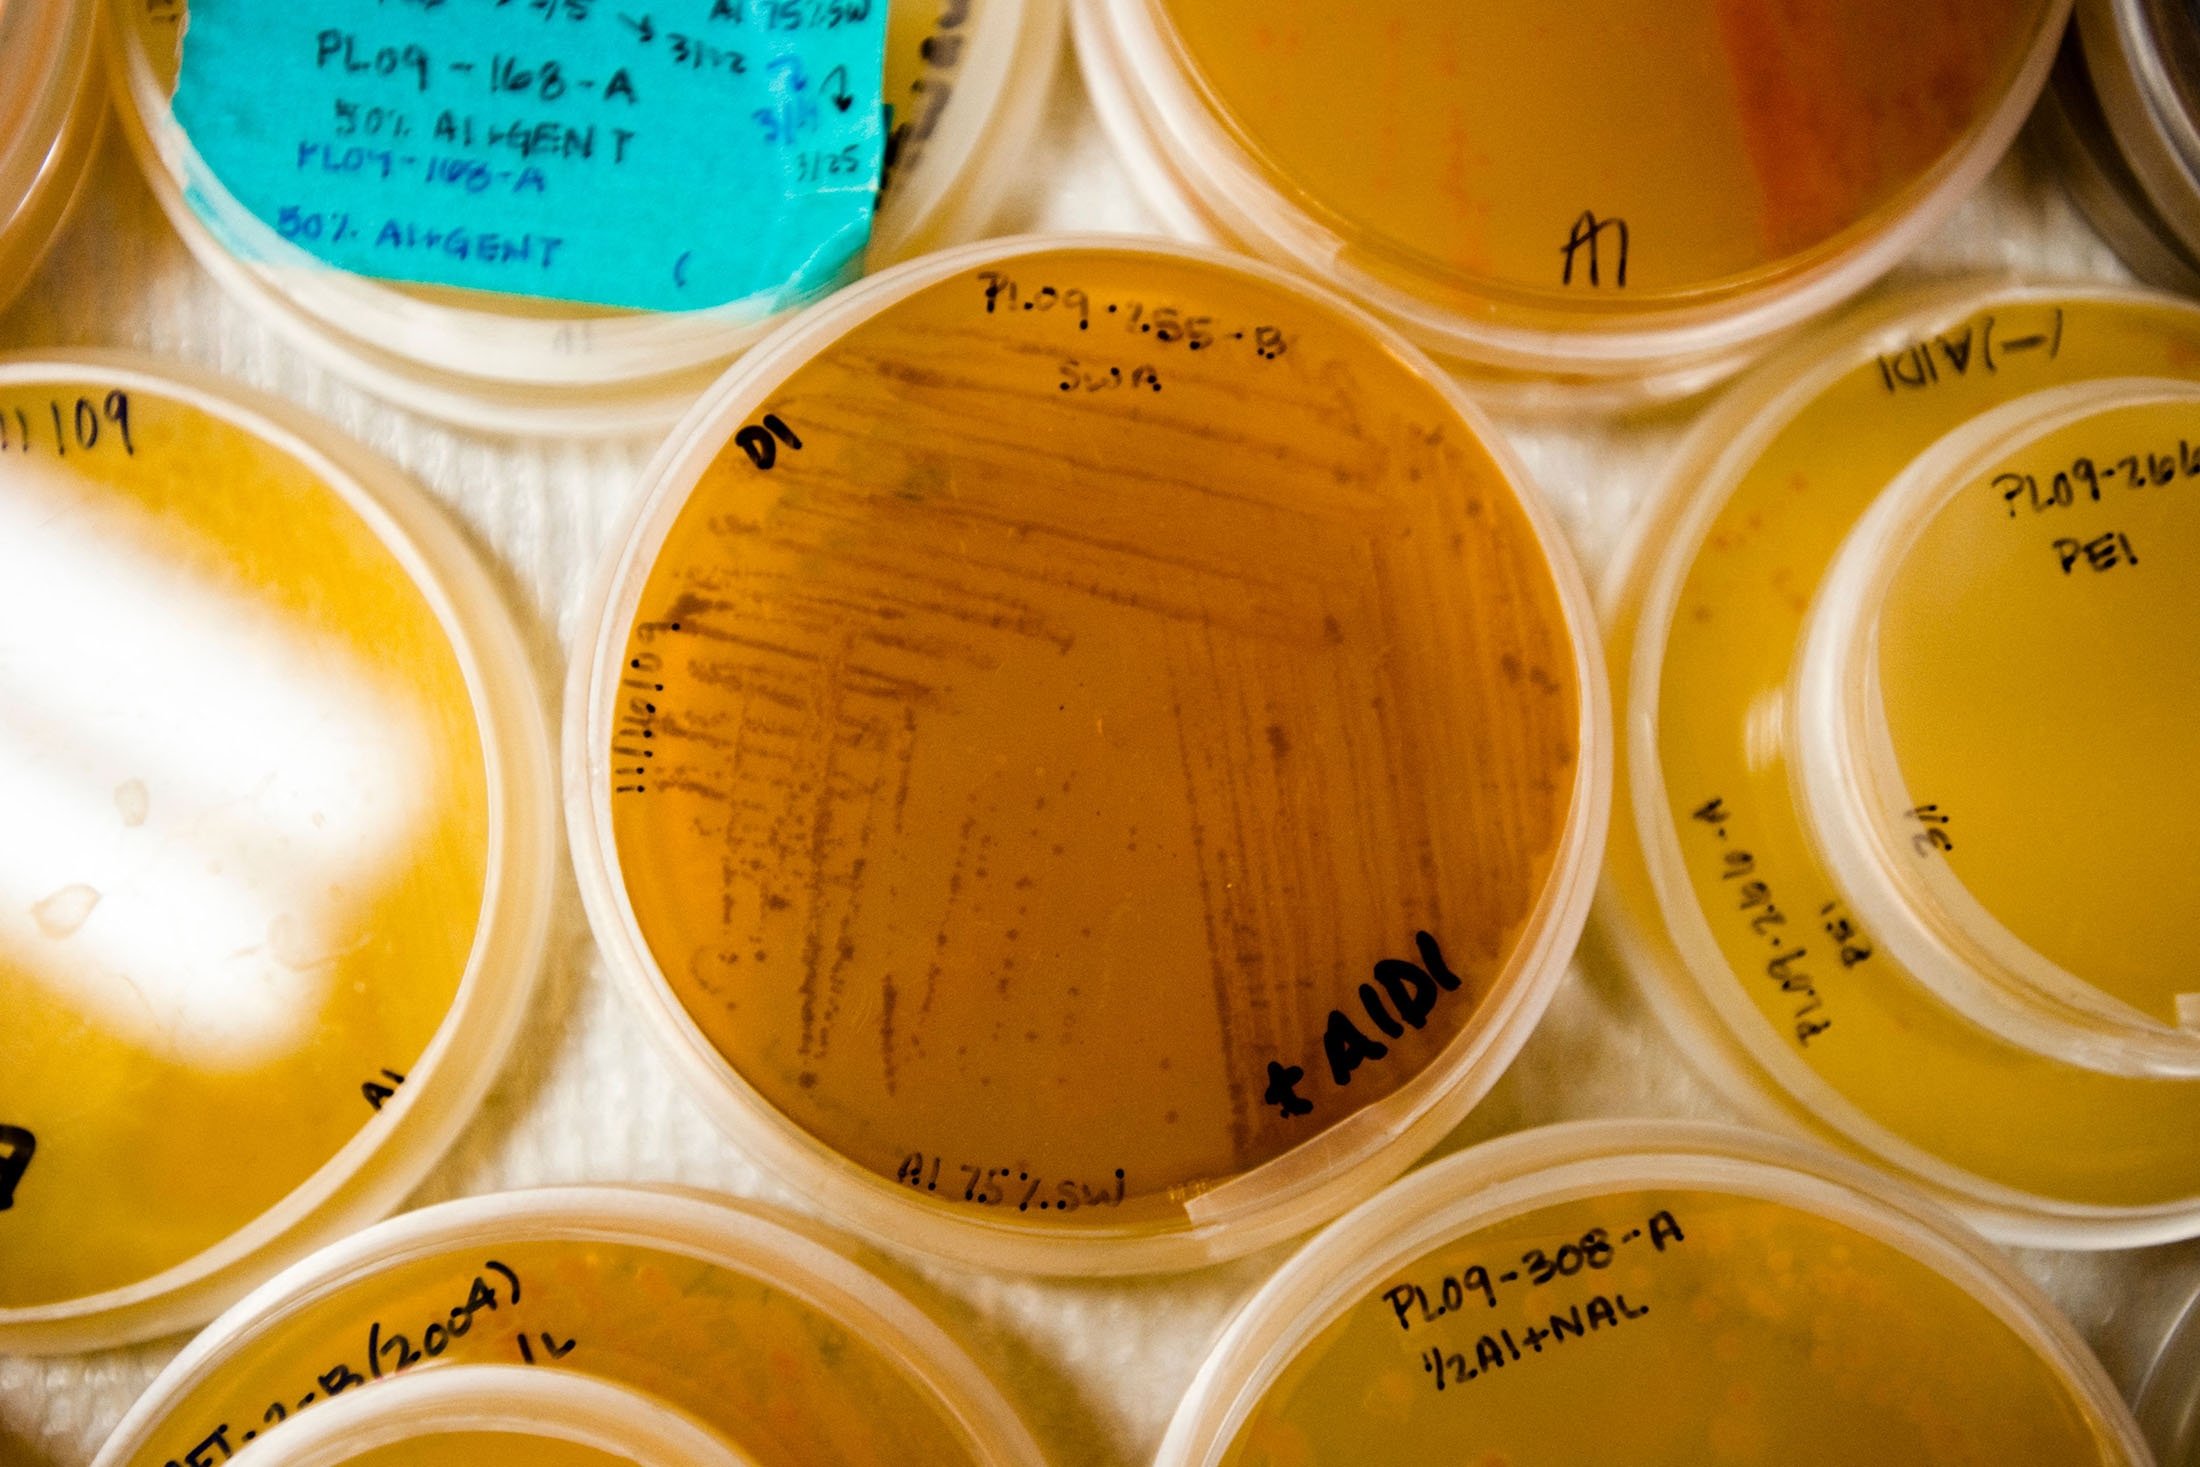 Marine samples being readied for study in the laboratory of William Fenical, Scripps Institution of Oceanography, in San Diego, U.S. (AFP Photo)